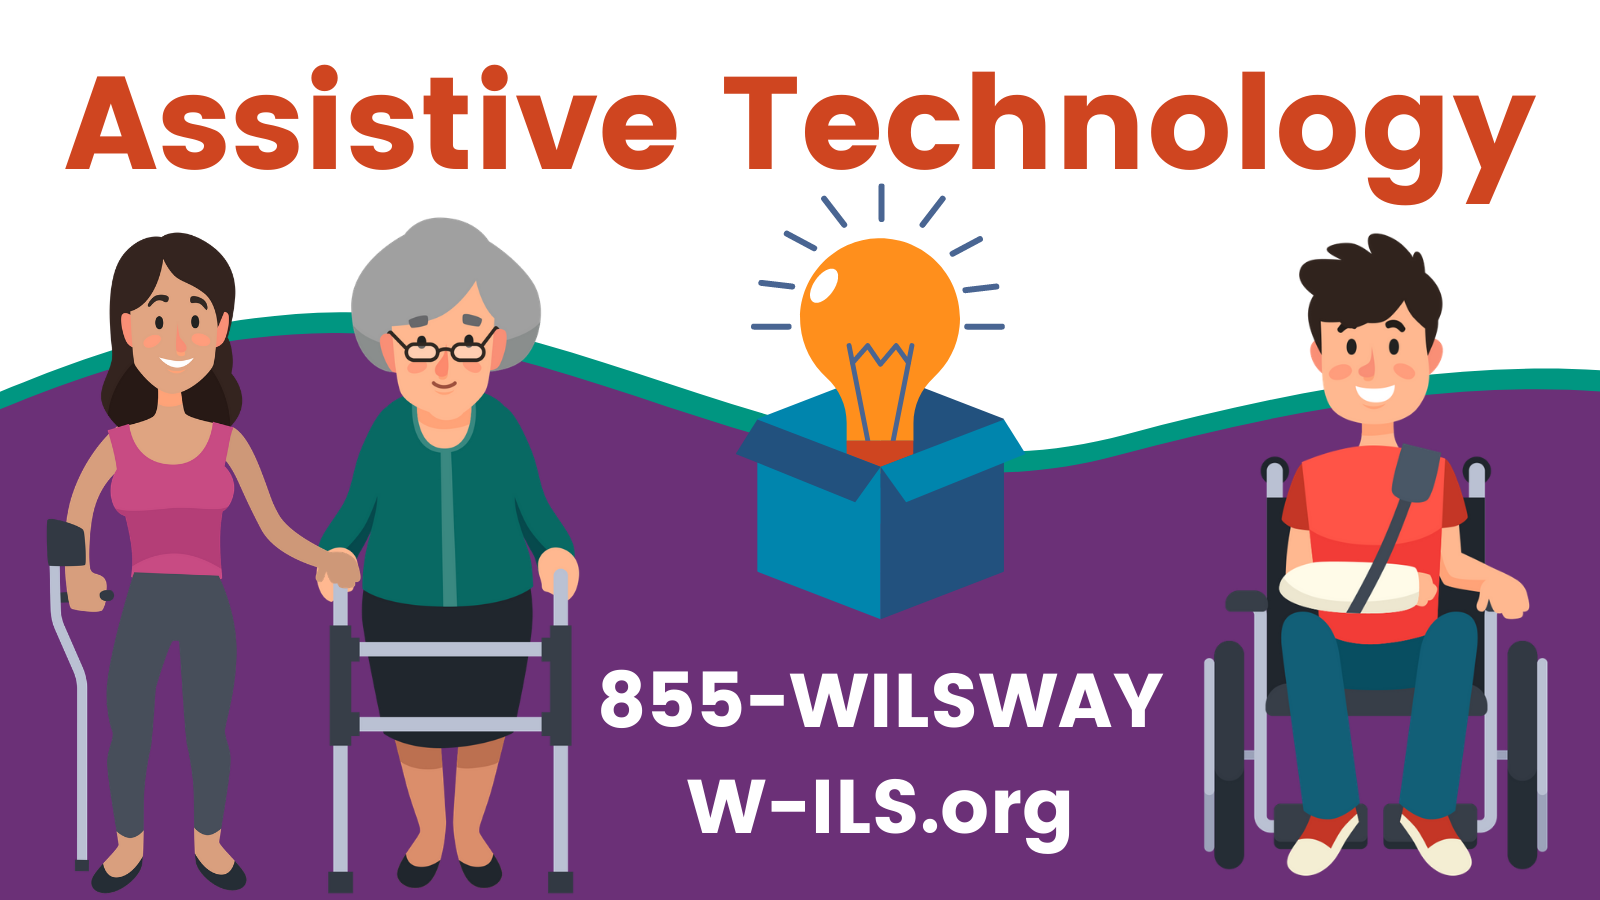 WILS Assistive Technology. Call 855-WILSWAY or visit W-ILS.org